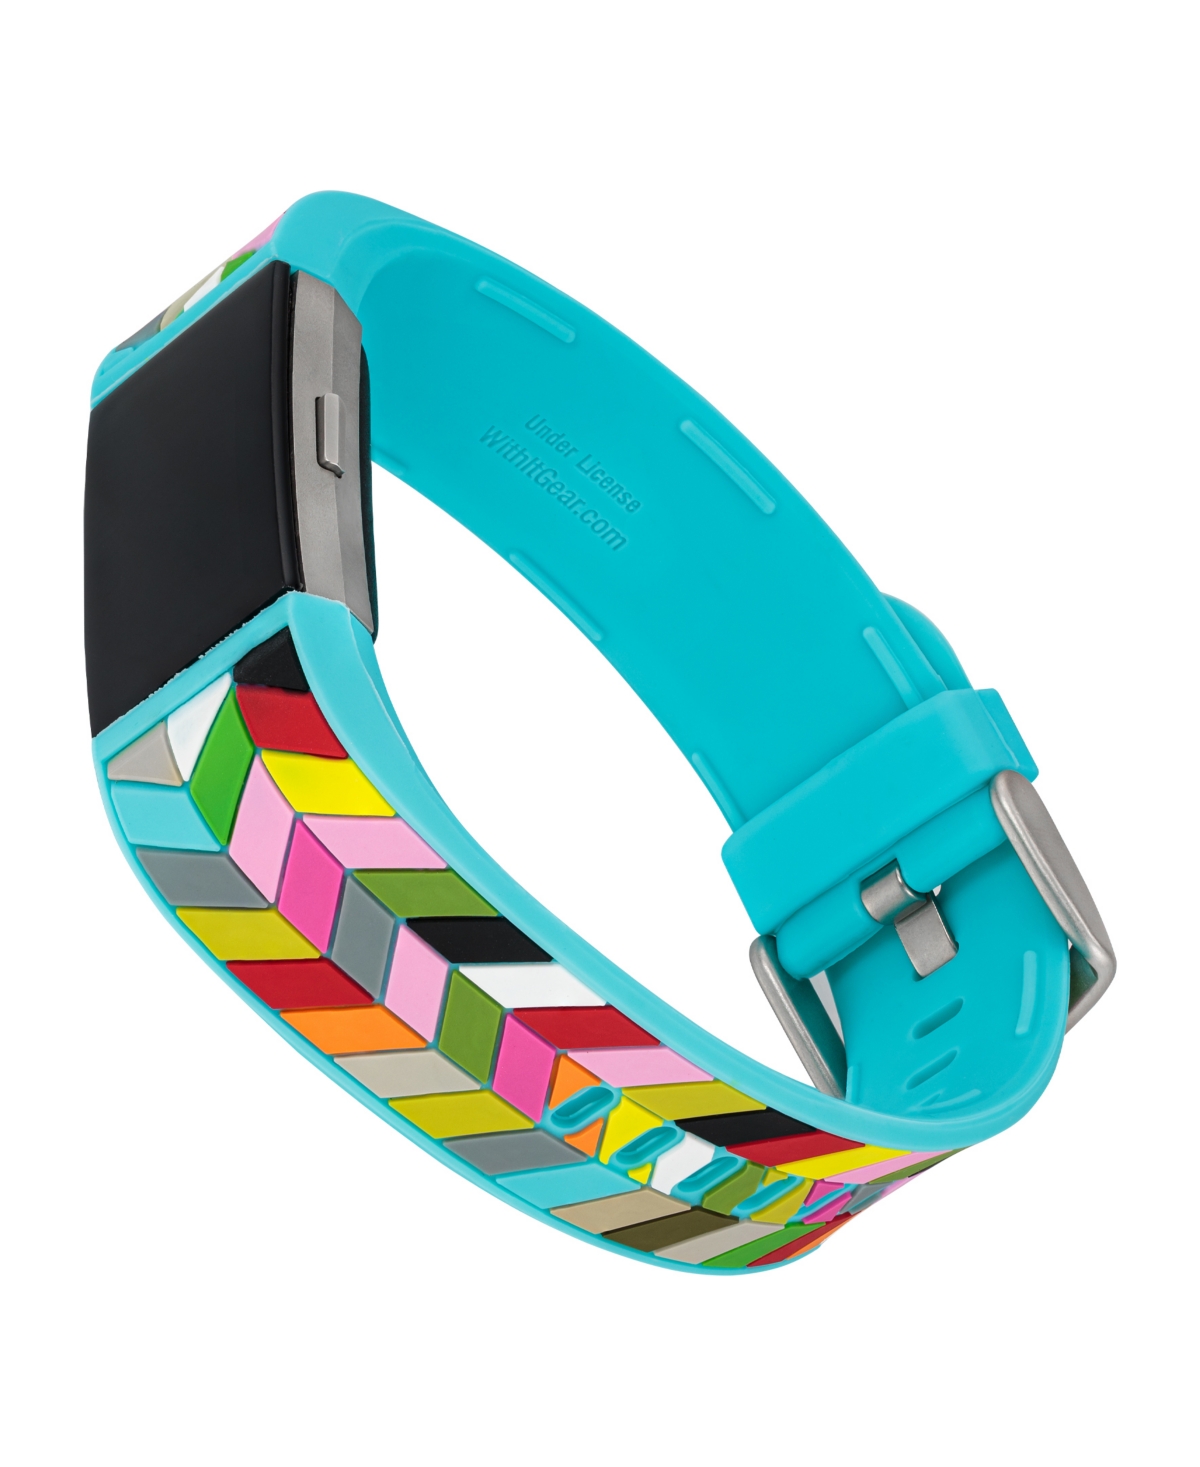 Light Blue and Rainbow Premium Silicone Band Compatible with the Fitbit Charge 2 - Light Blue, Rainbow